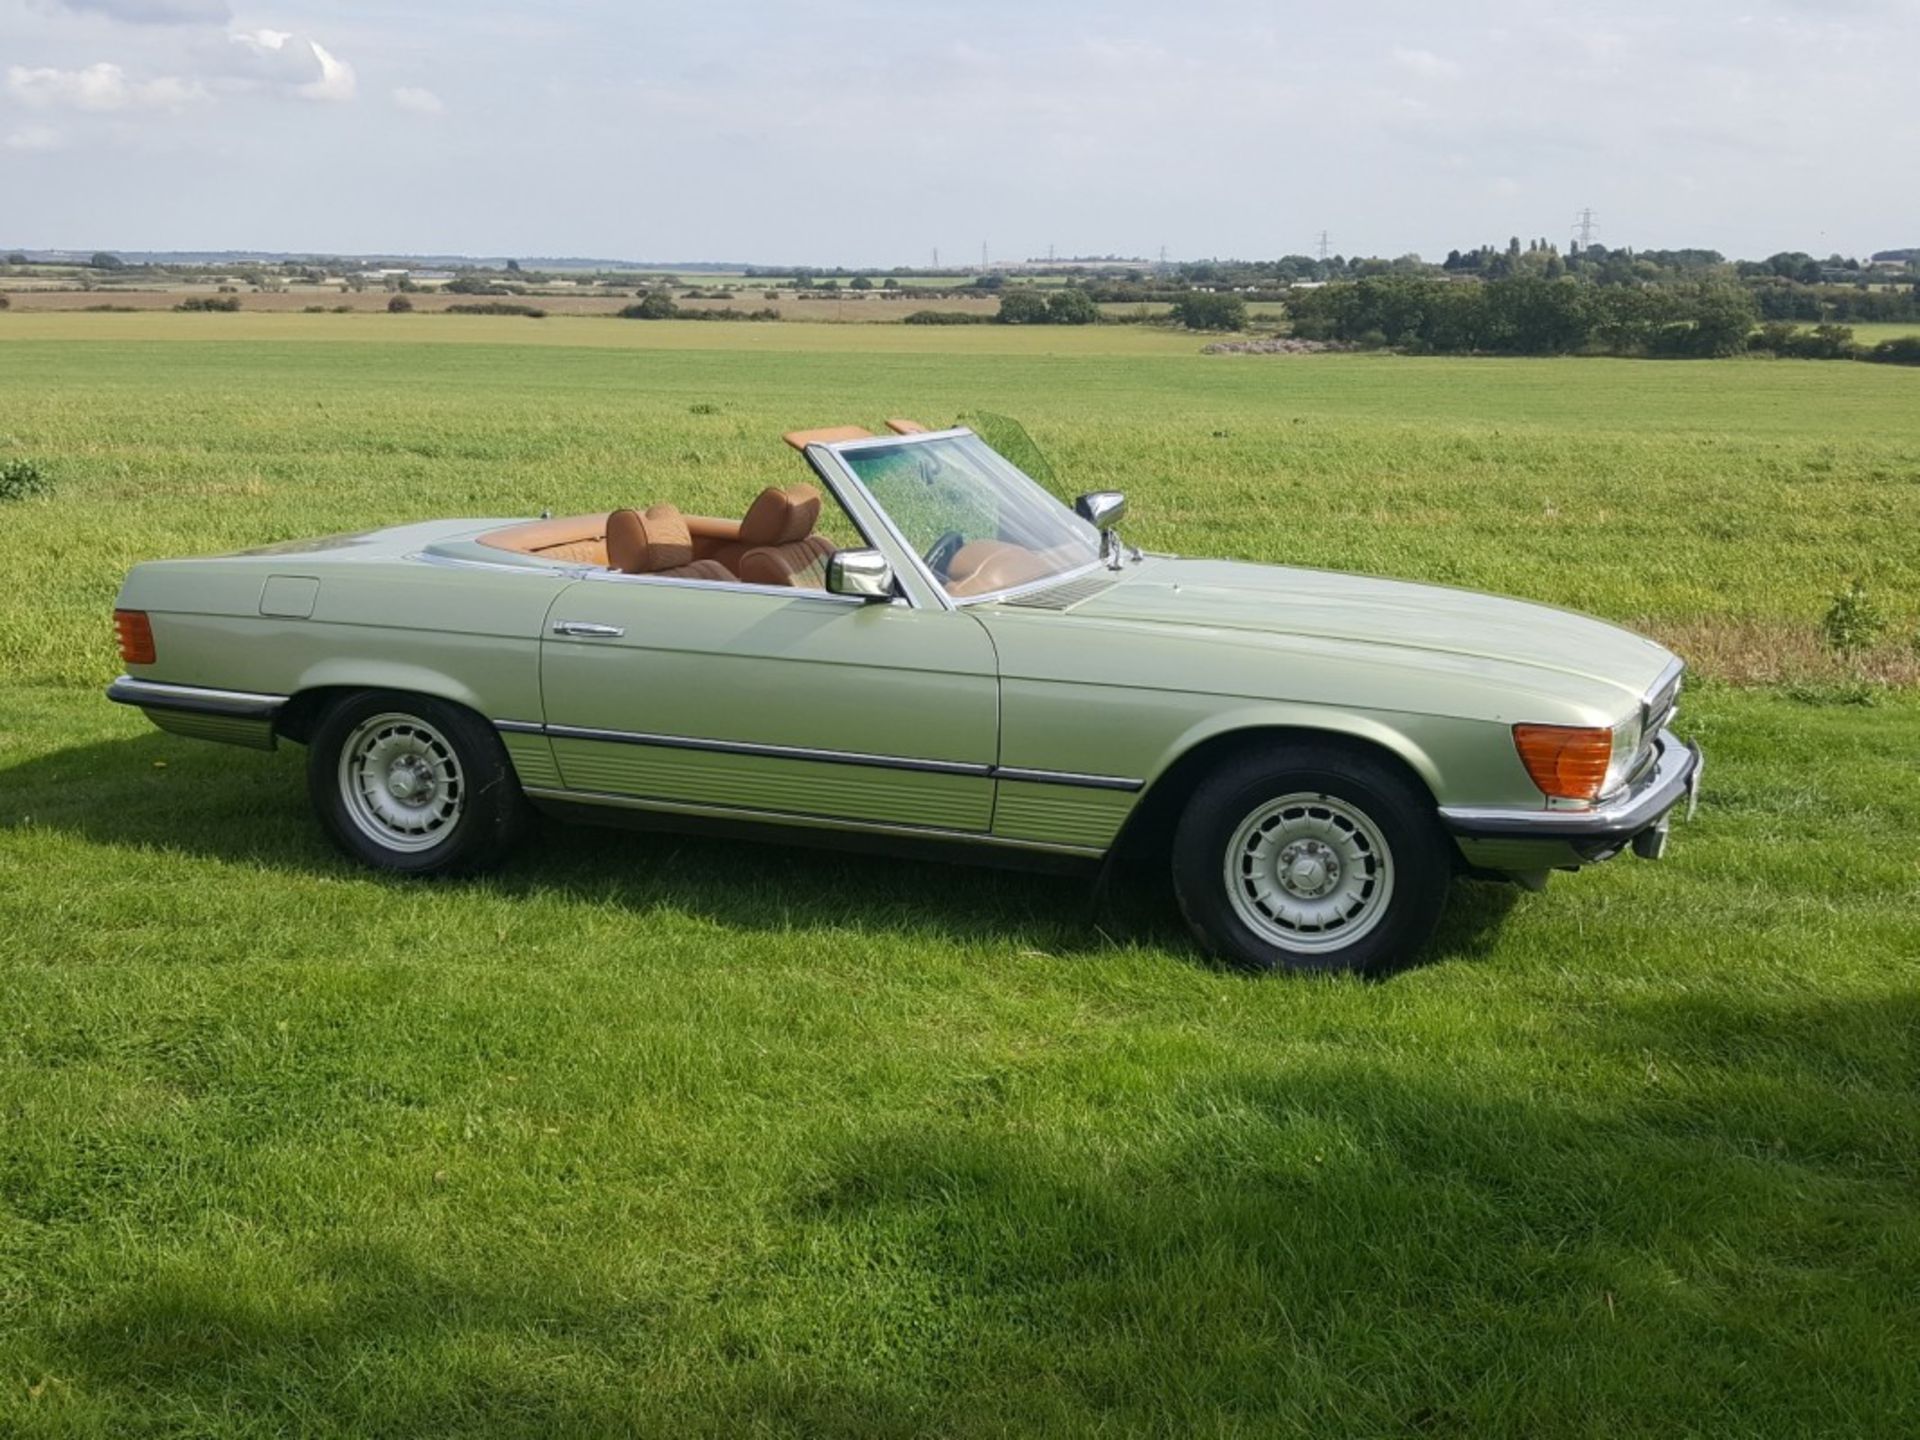 Mercedes 450SL Automatic 1978 - Image 2 of 12